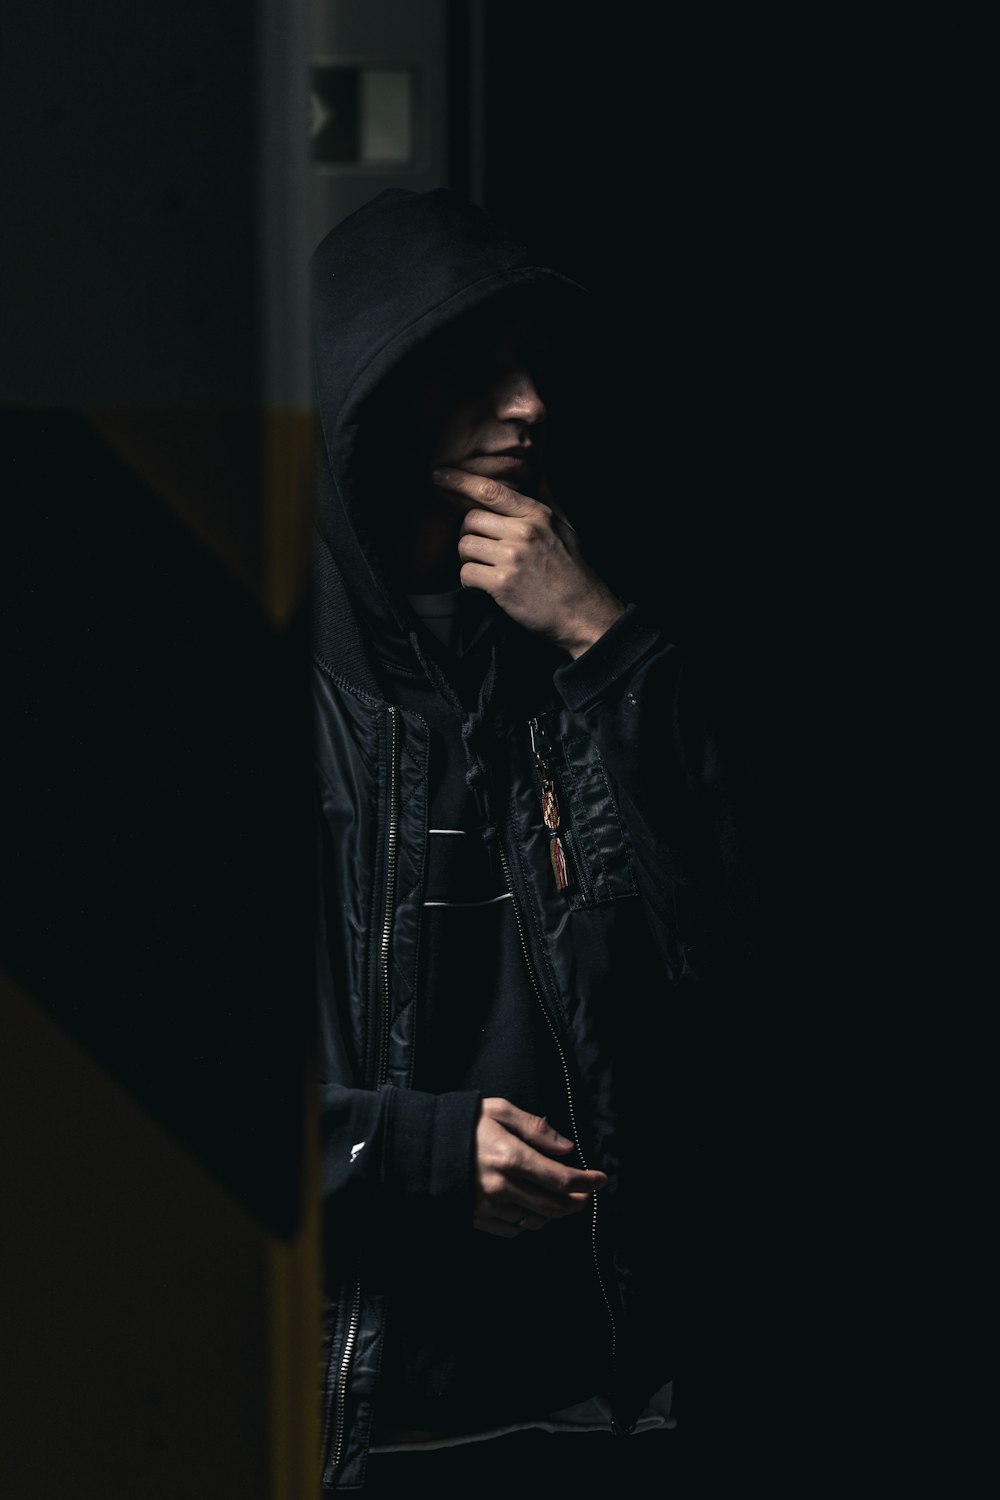 Mystery Man Pictures | Download Free Images on Unsplash